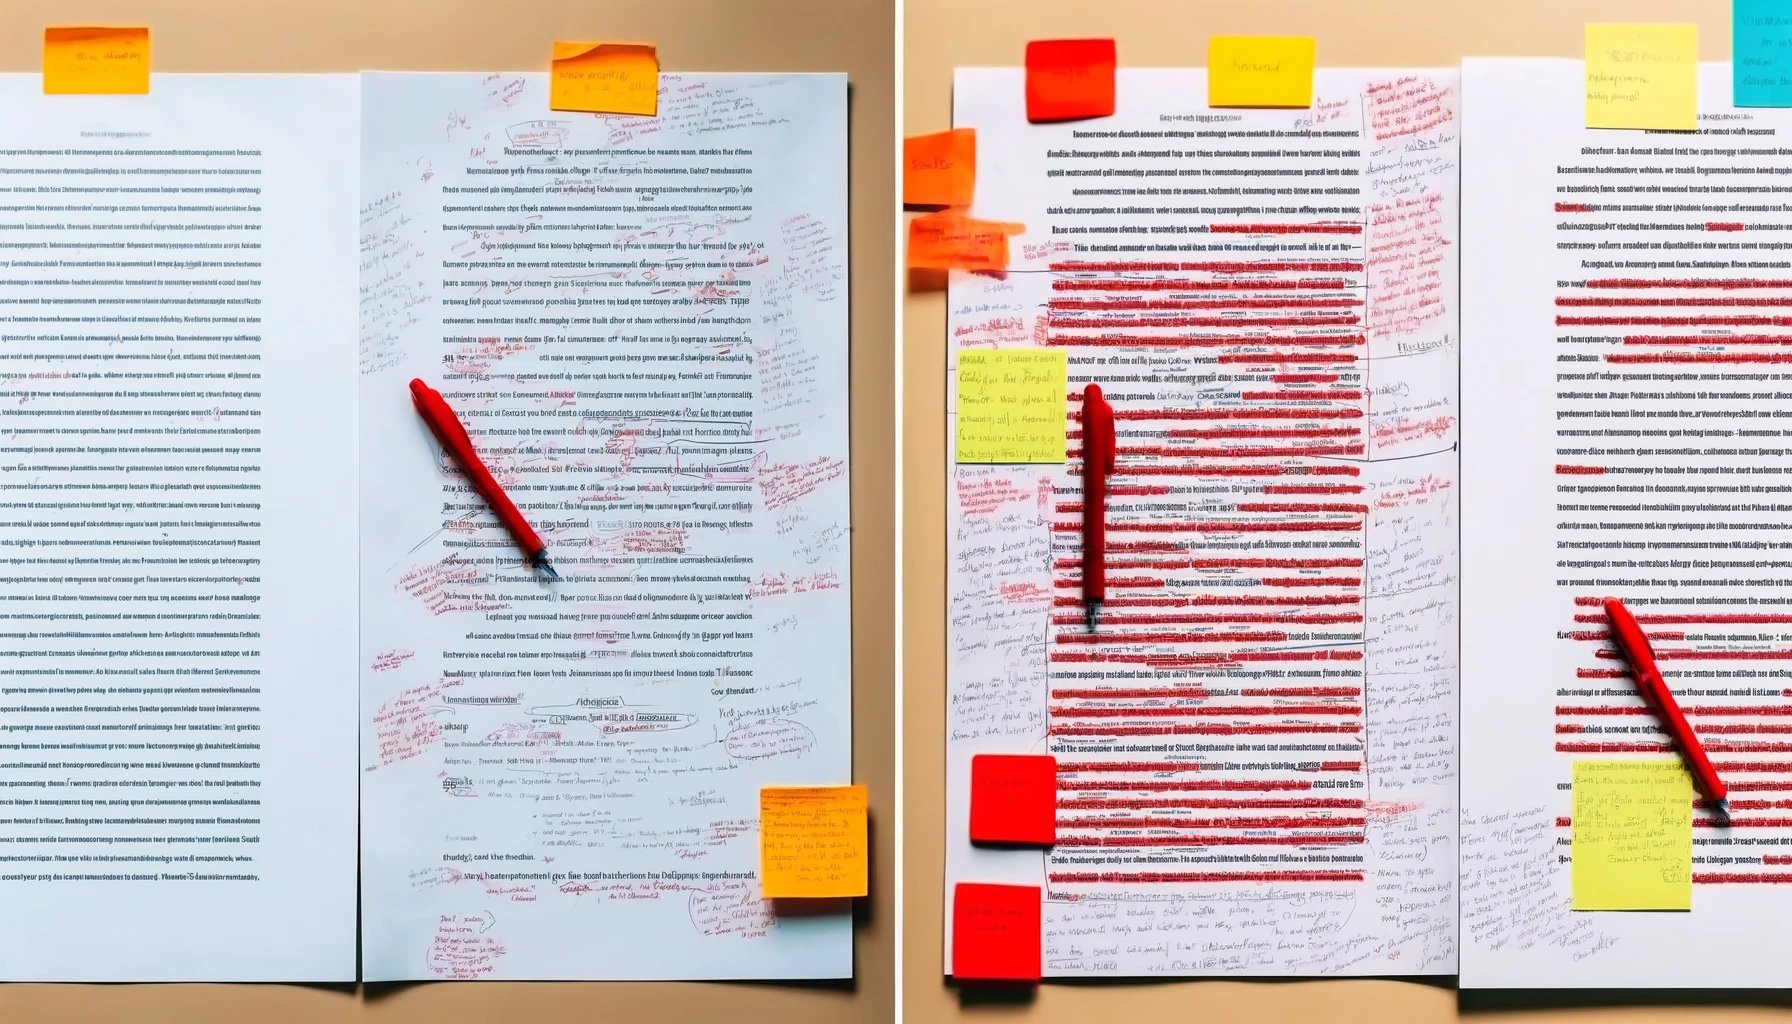 Dissertation before and after editing